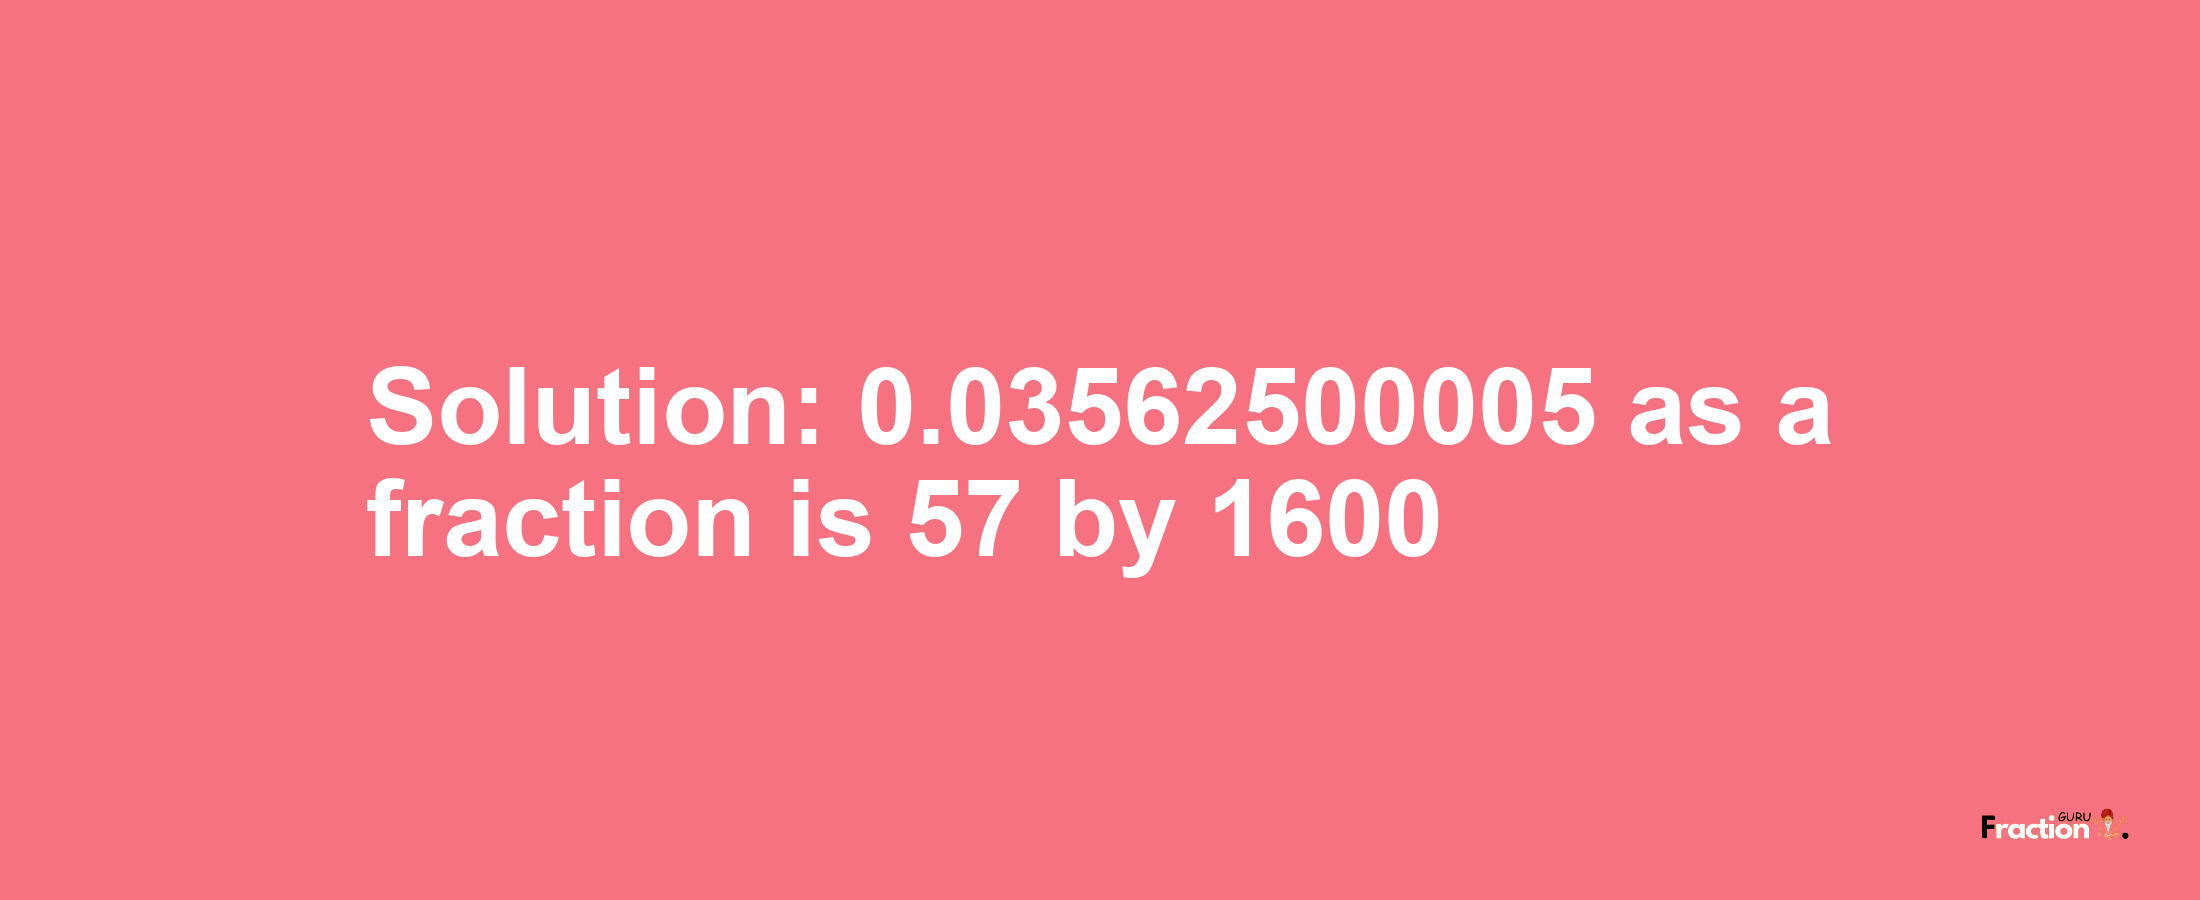 Solution:0.03562500005 as a fraction is 57/1600